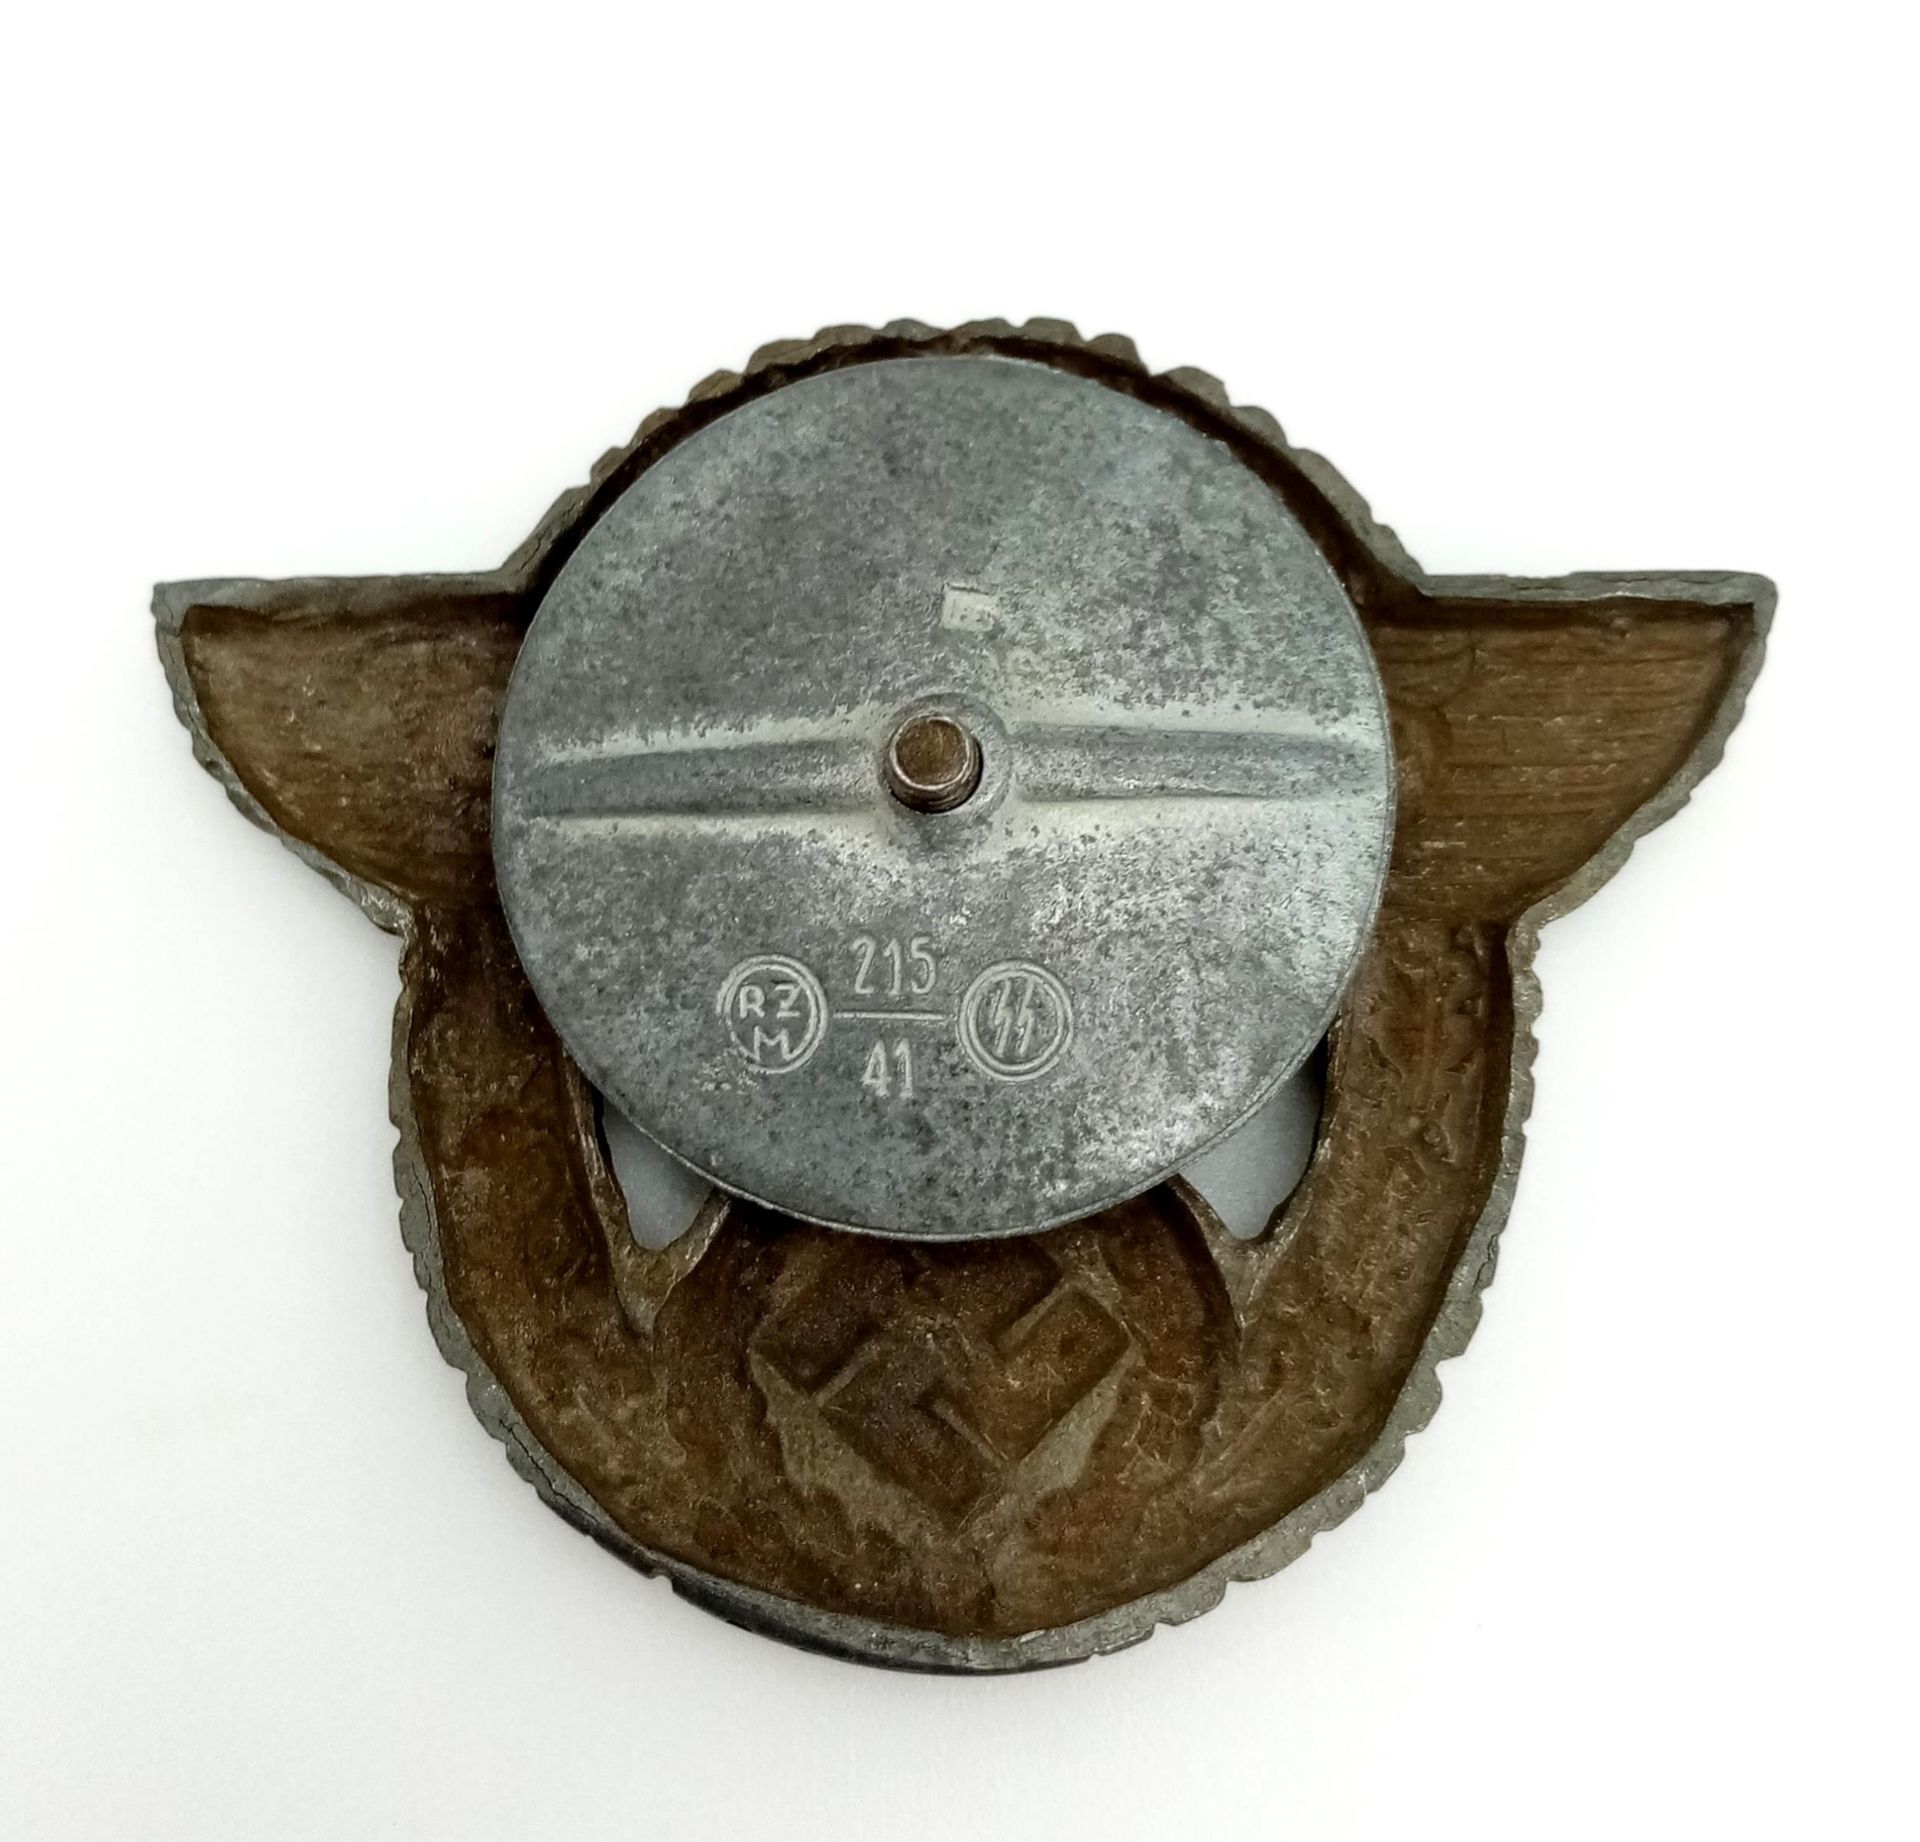 WW2 German Police Visor Cap Badge with screw back fitting for easy removal for cleaning etc. - Image 2 of 3